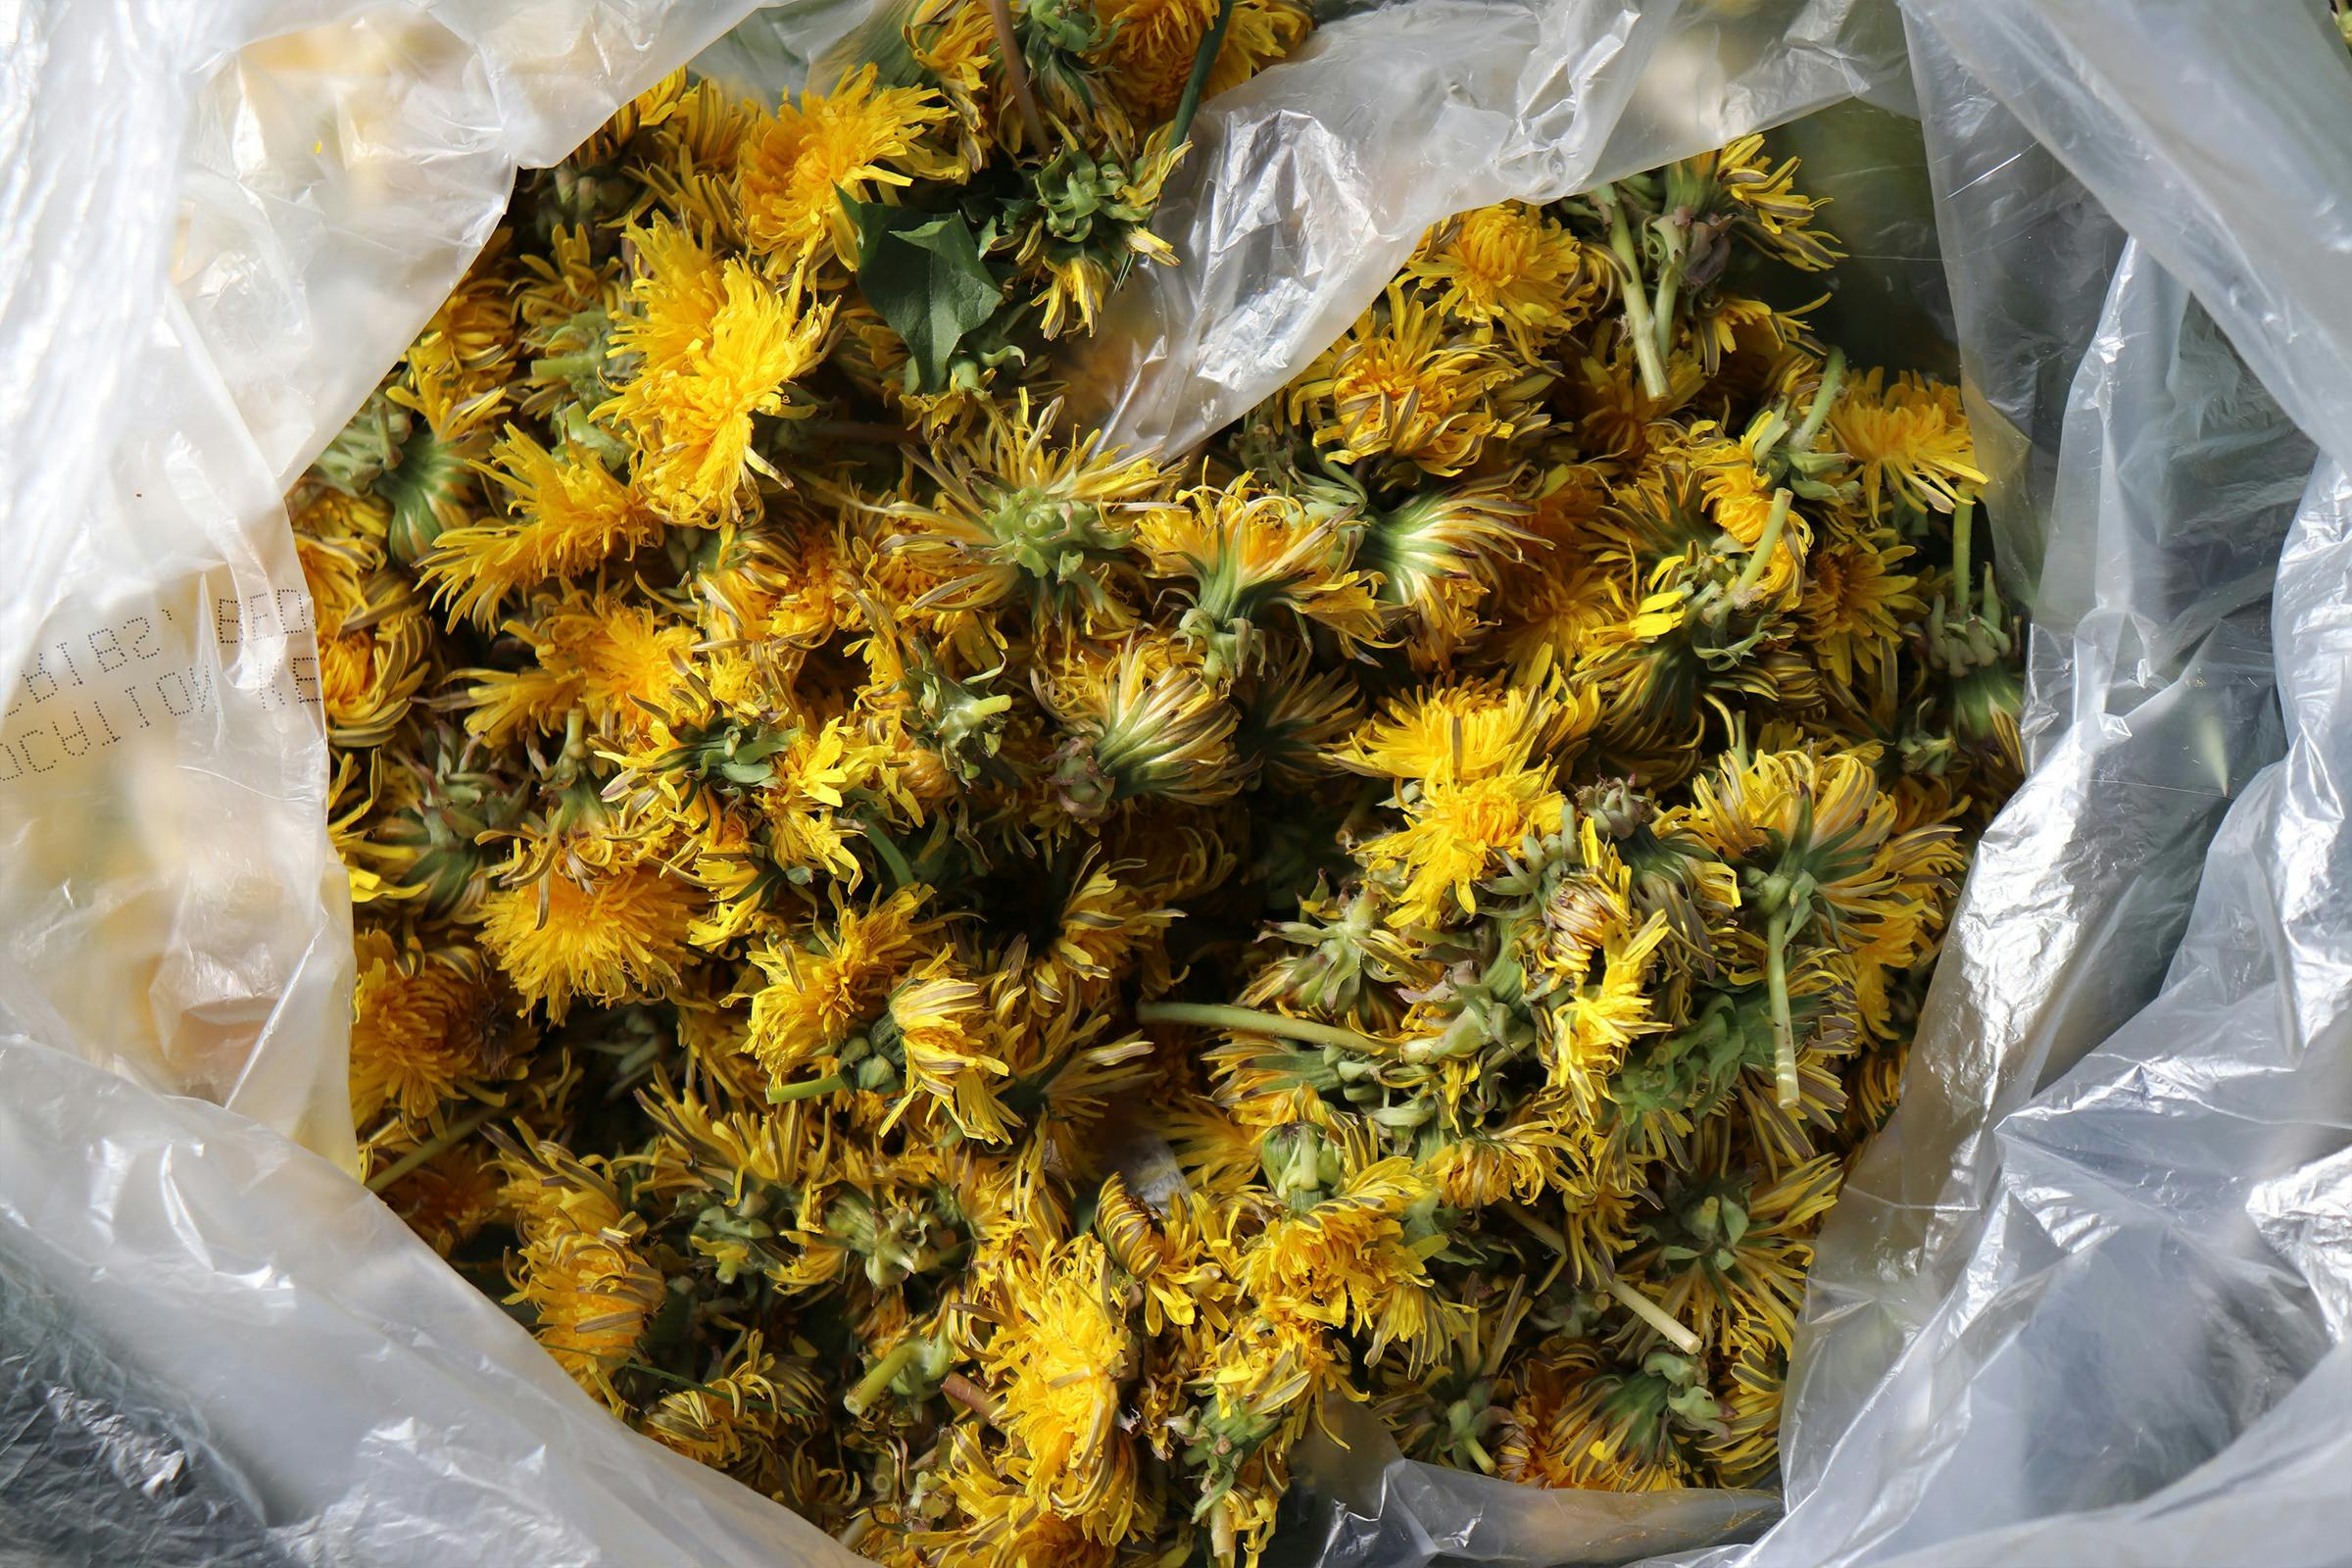 A plastic bag full of picked dandelions ready for brewing sour ale